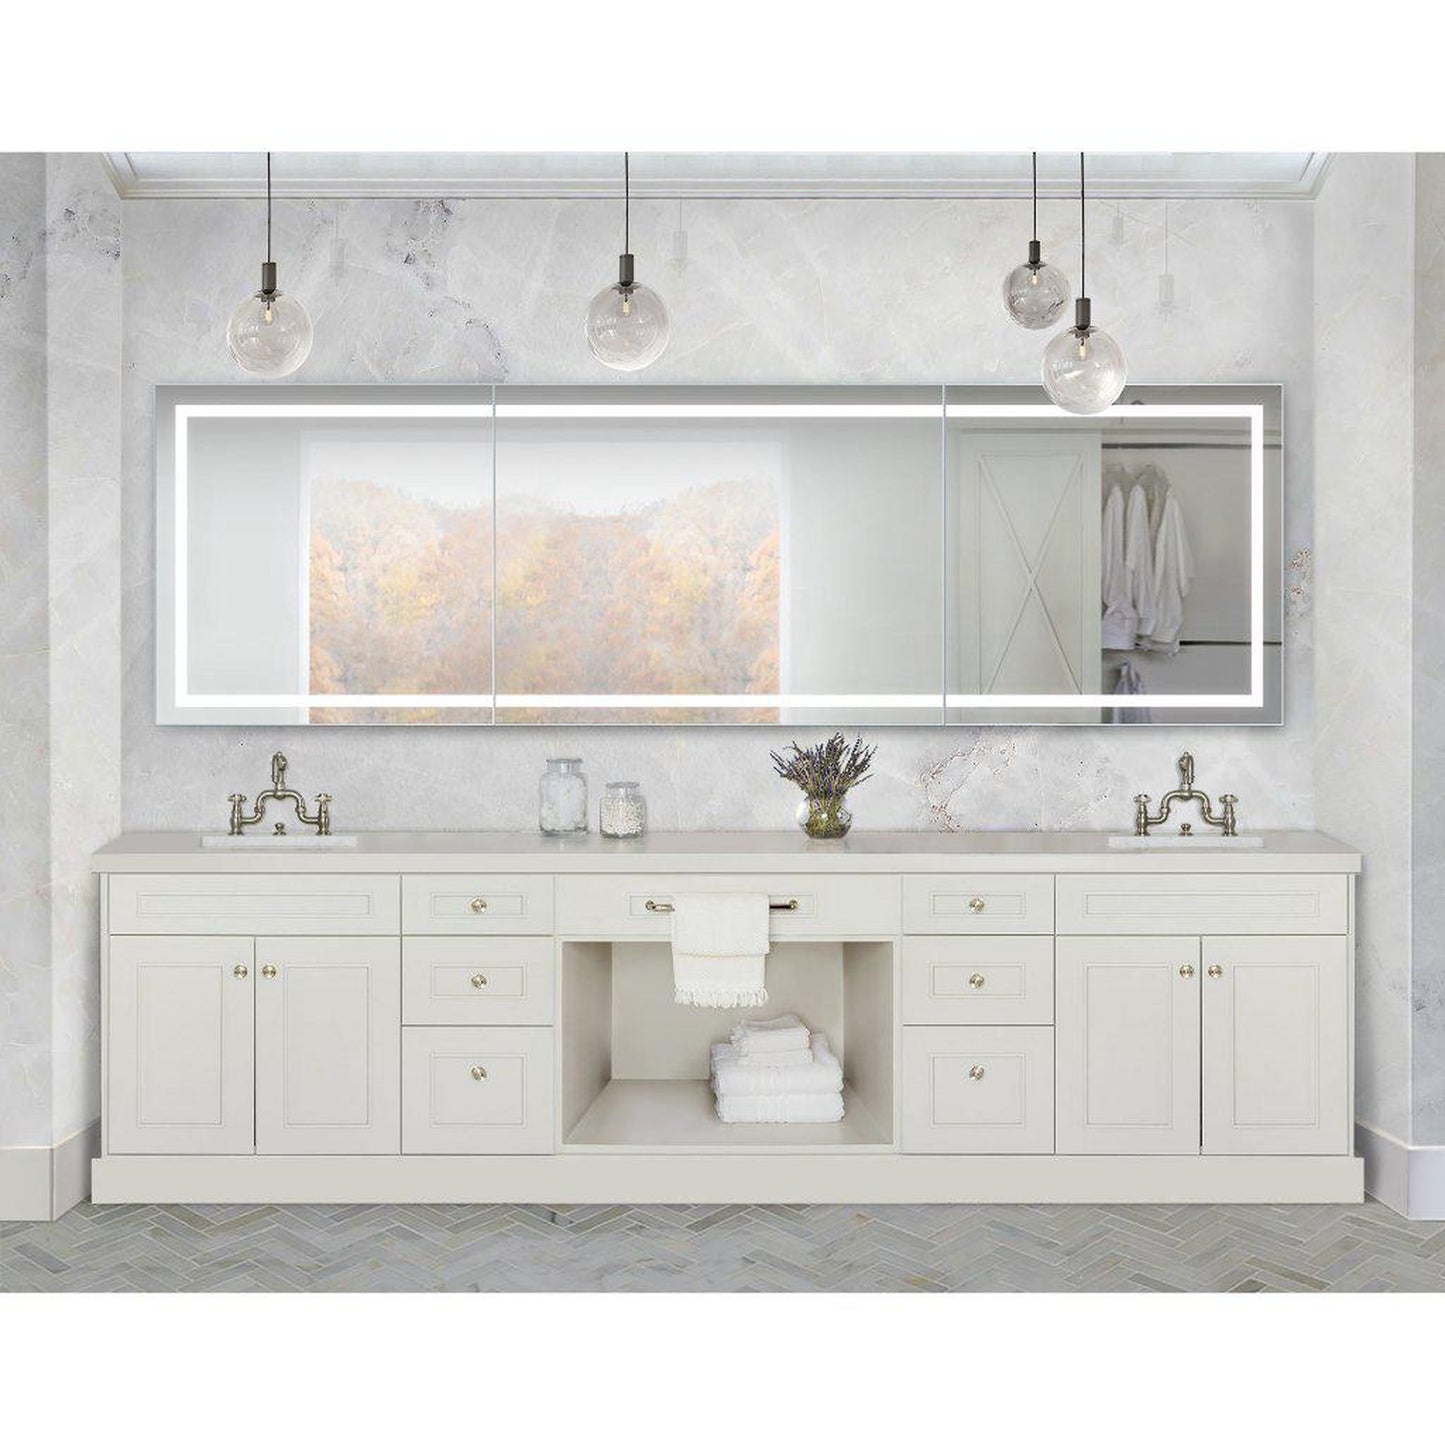 Krugg Reflections Mod 120" x 36" 5000K Long Modular Corner Wall-Mounted Silver-Backed LED Bathroom Vanity Mirror With Built-in Defogger and Dimmer